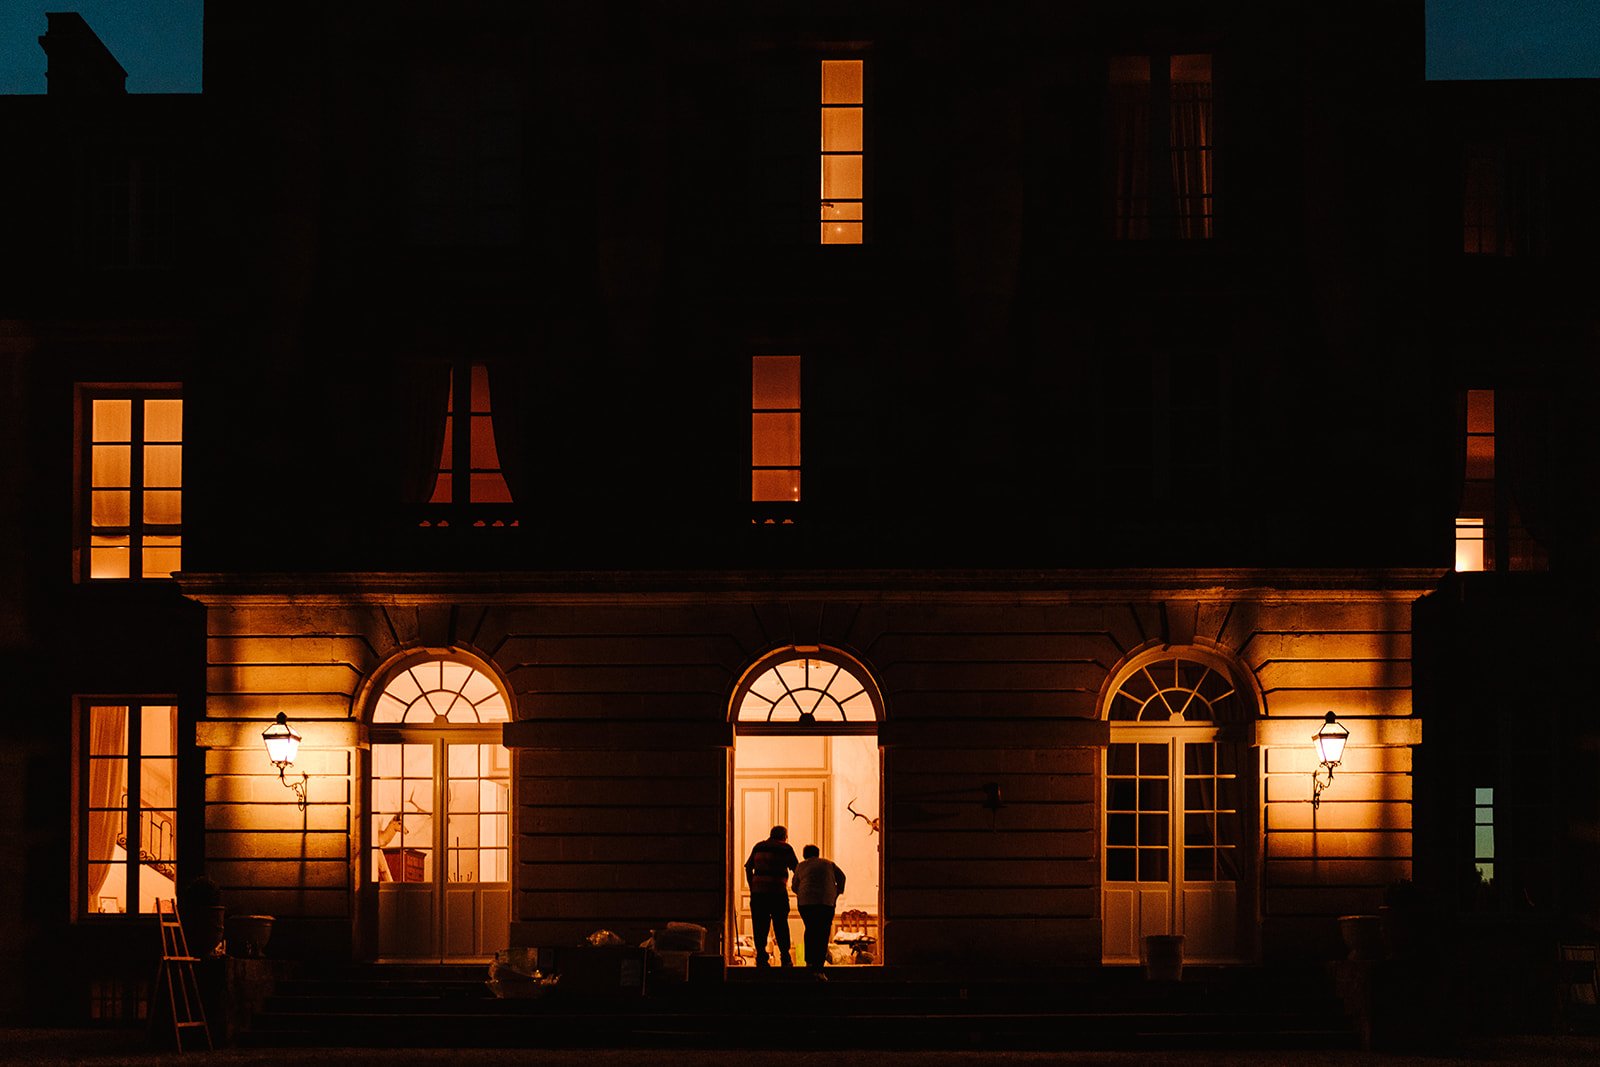 People silhouetted on the steps of the Chateau at night.